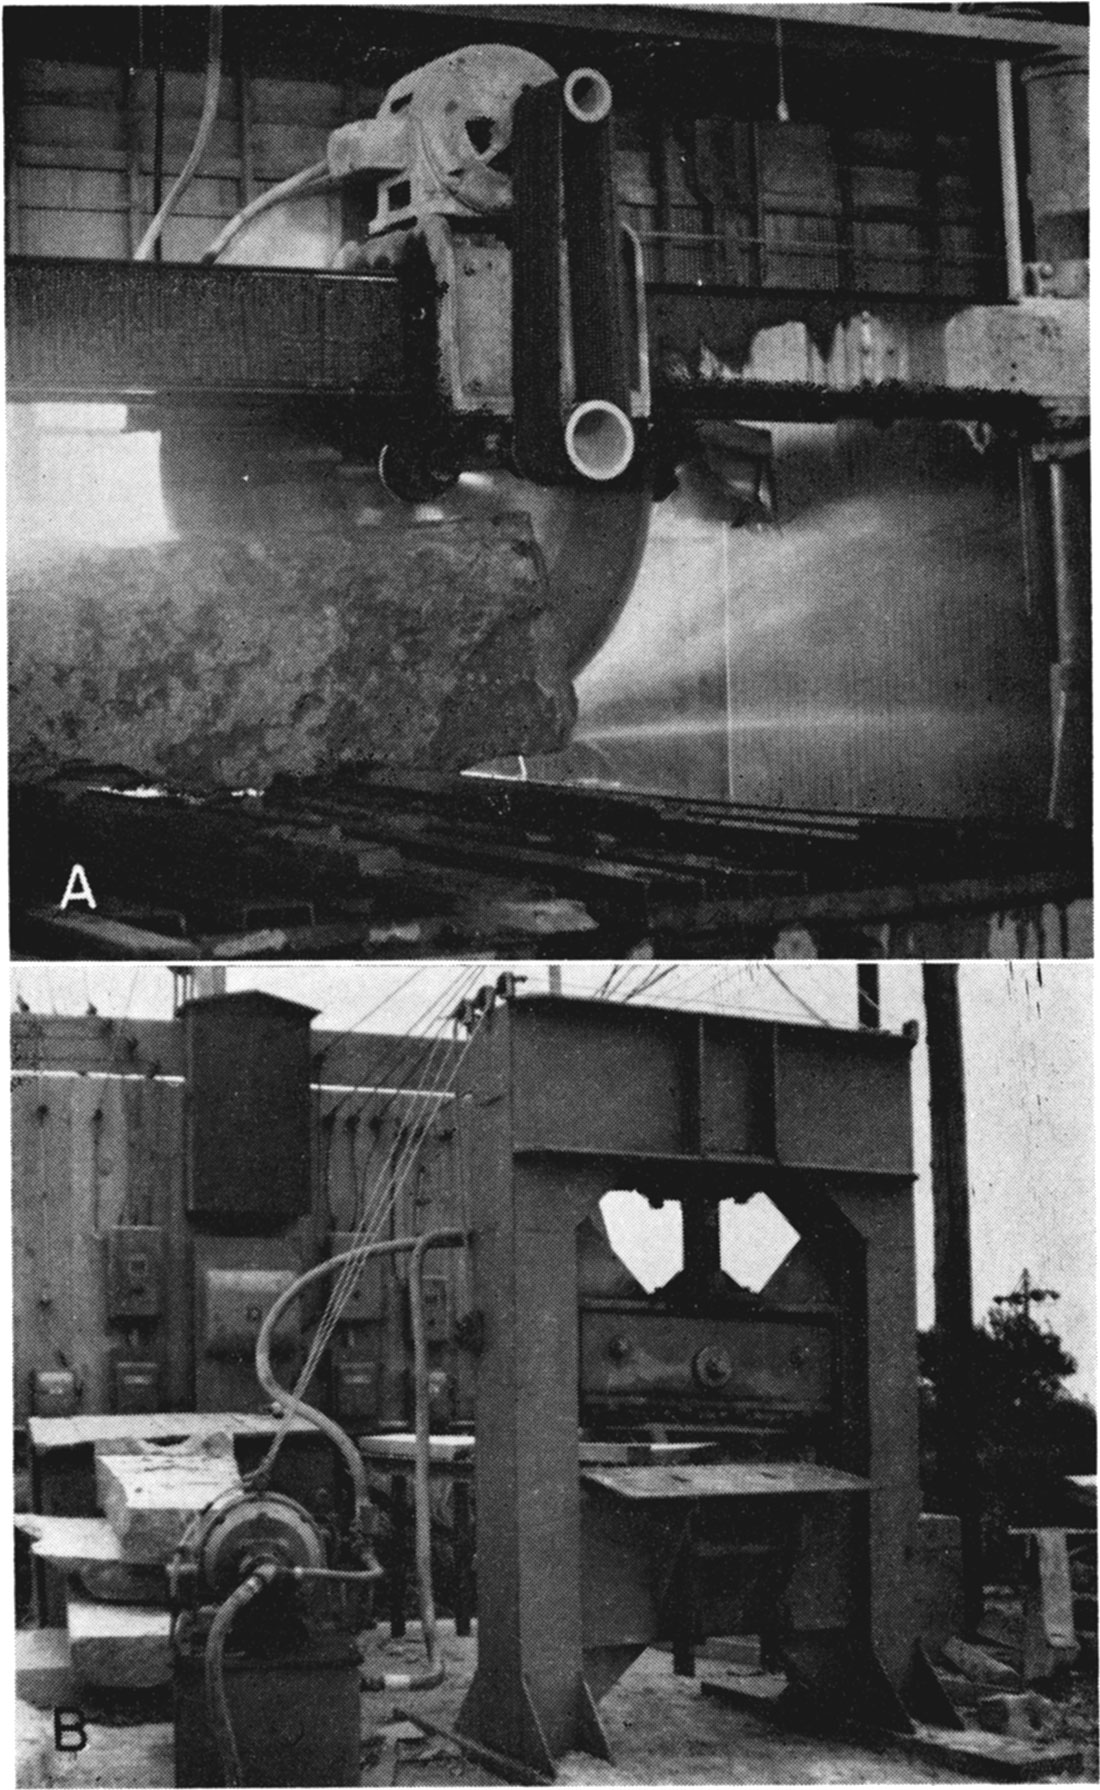 Two black and white photos; top is circular jointing saw, Manhattan Cut Stone Company, Manhattan; bottom is guillotine used for breaking slabs, Ervin Quarry, Cottonwood Falls.